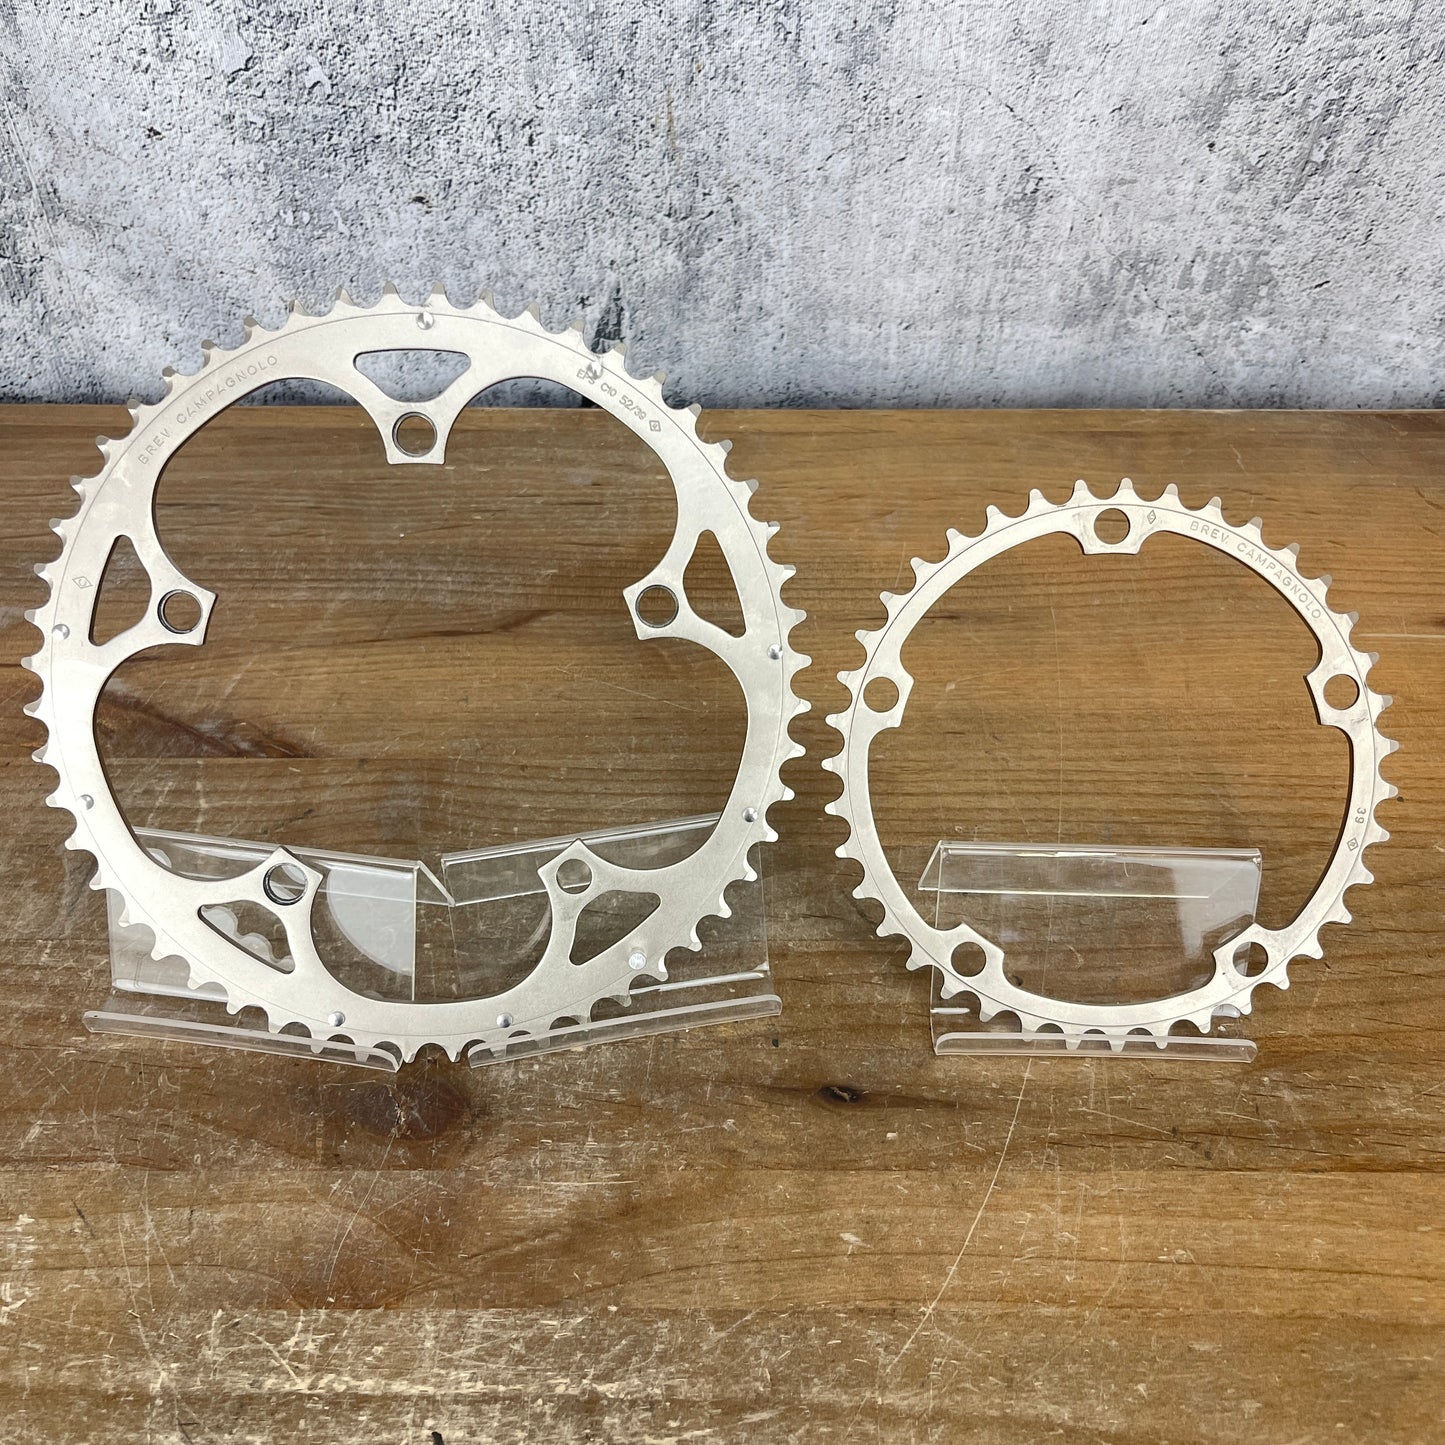 Low Mile! Campagnolo Brev 52/39t 130BCD 10-Speed Road Bike Chainrings 132g